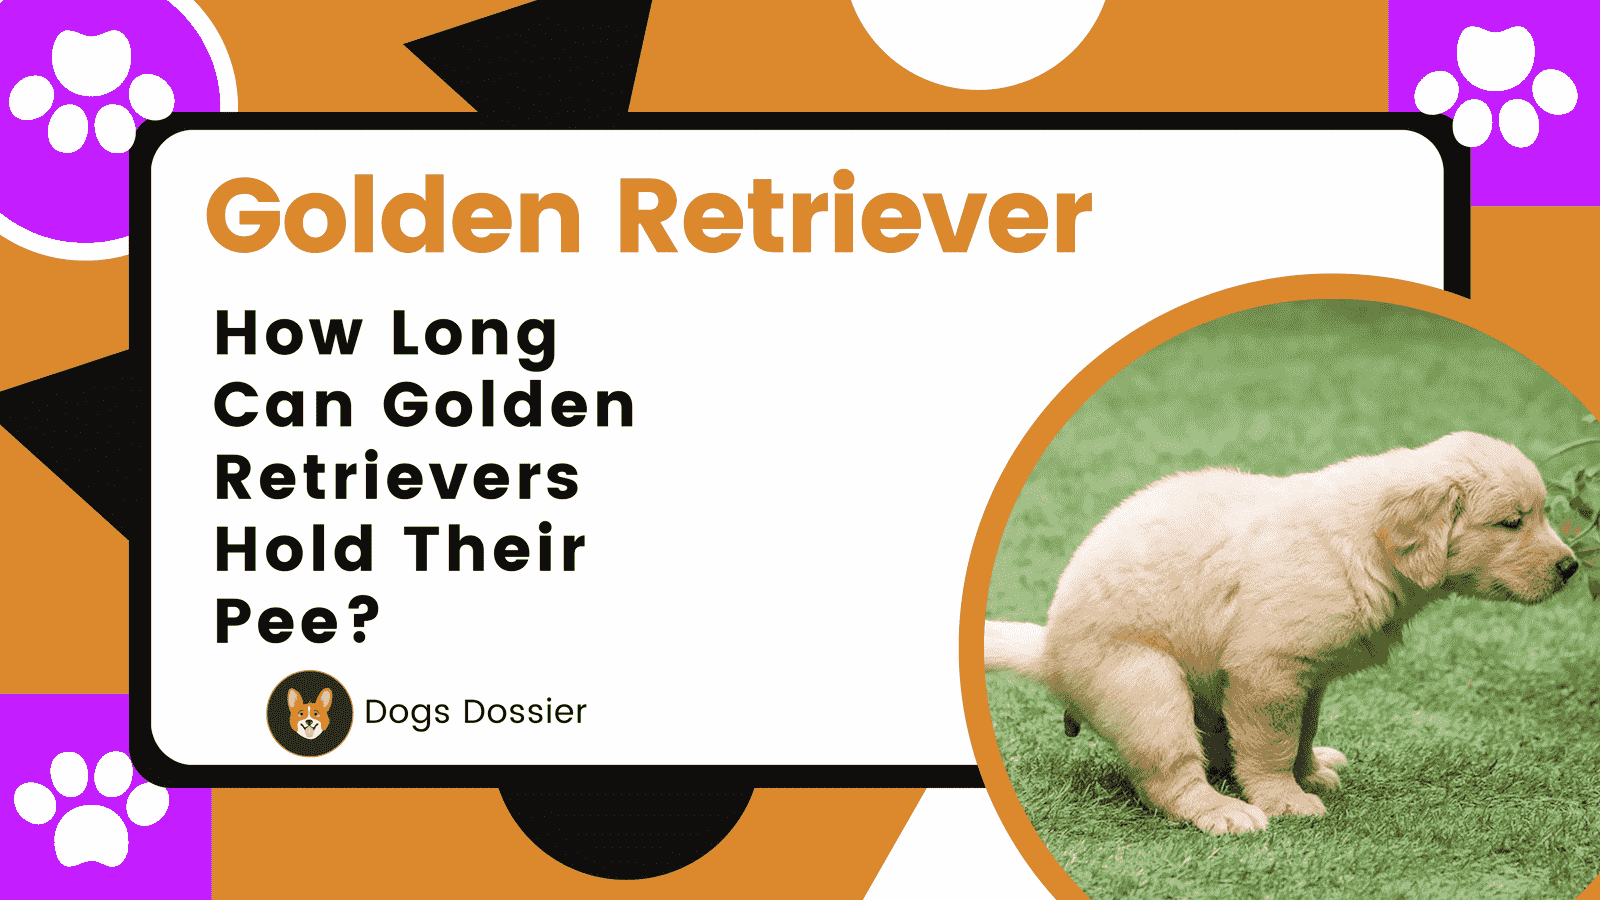 How long can Golden Retrievers hold their pee?